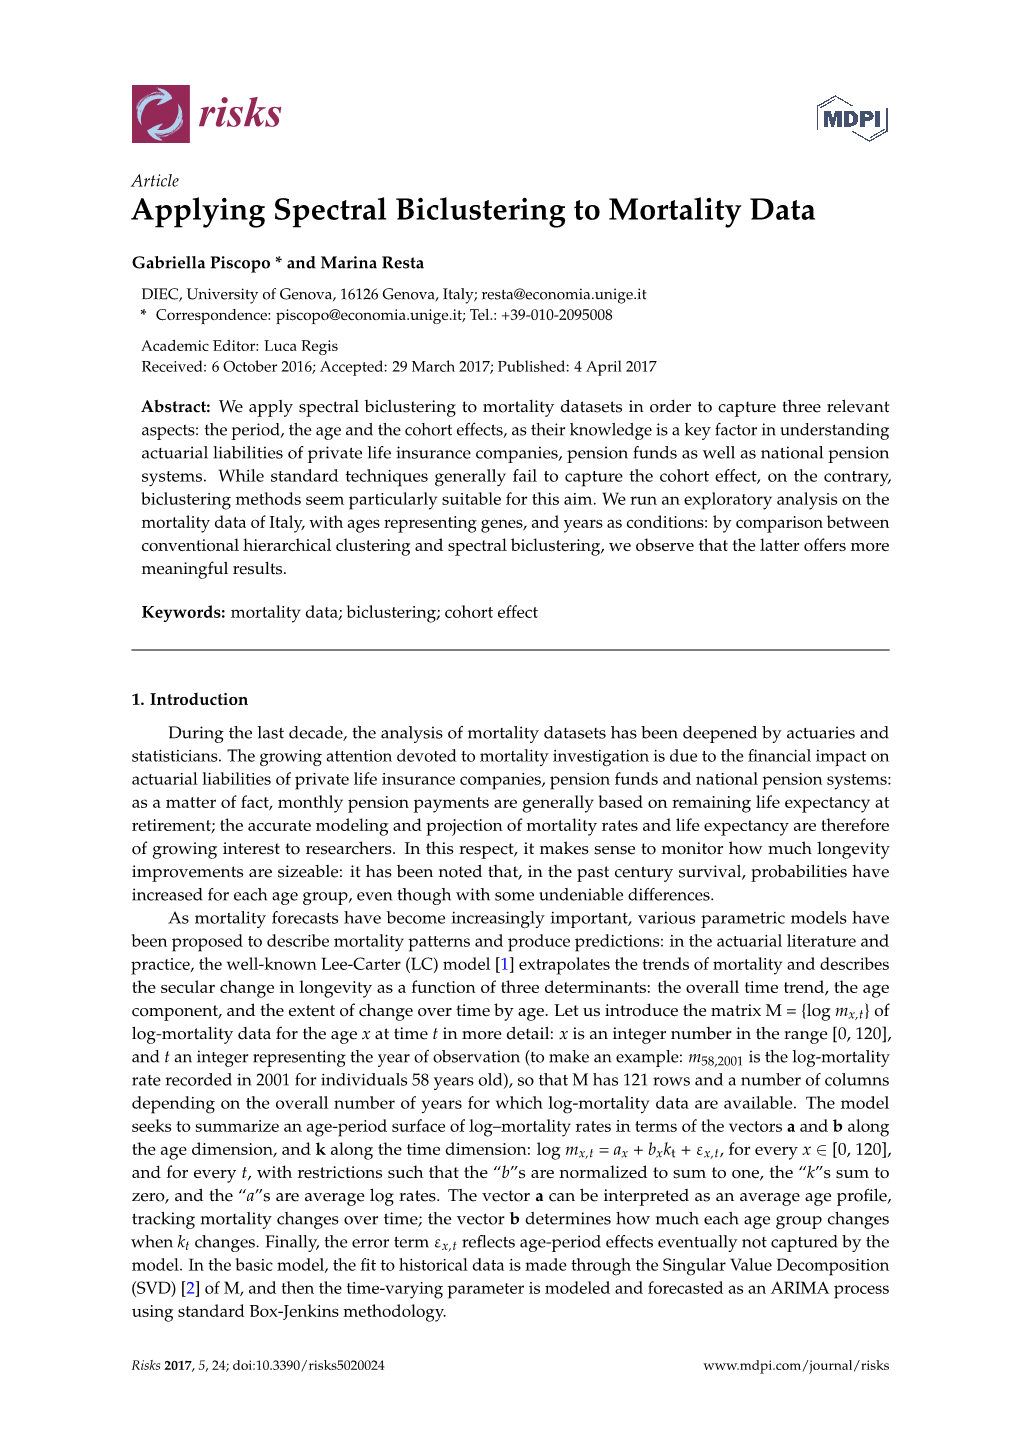 Applying Spectral Biclustering to Mortality Data